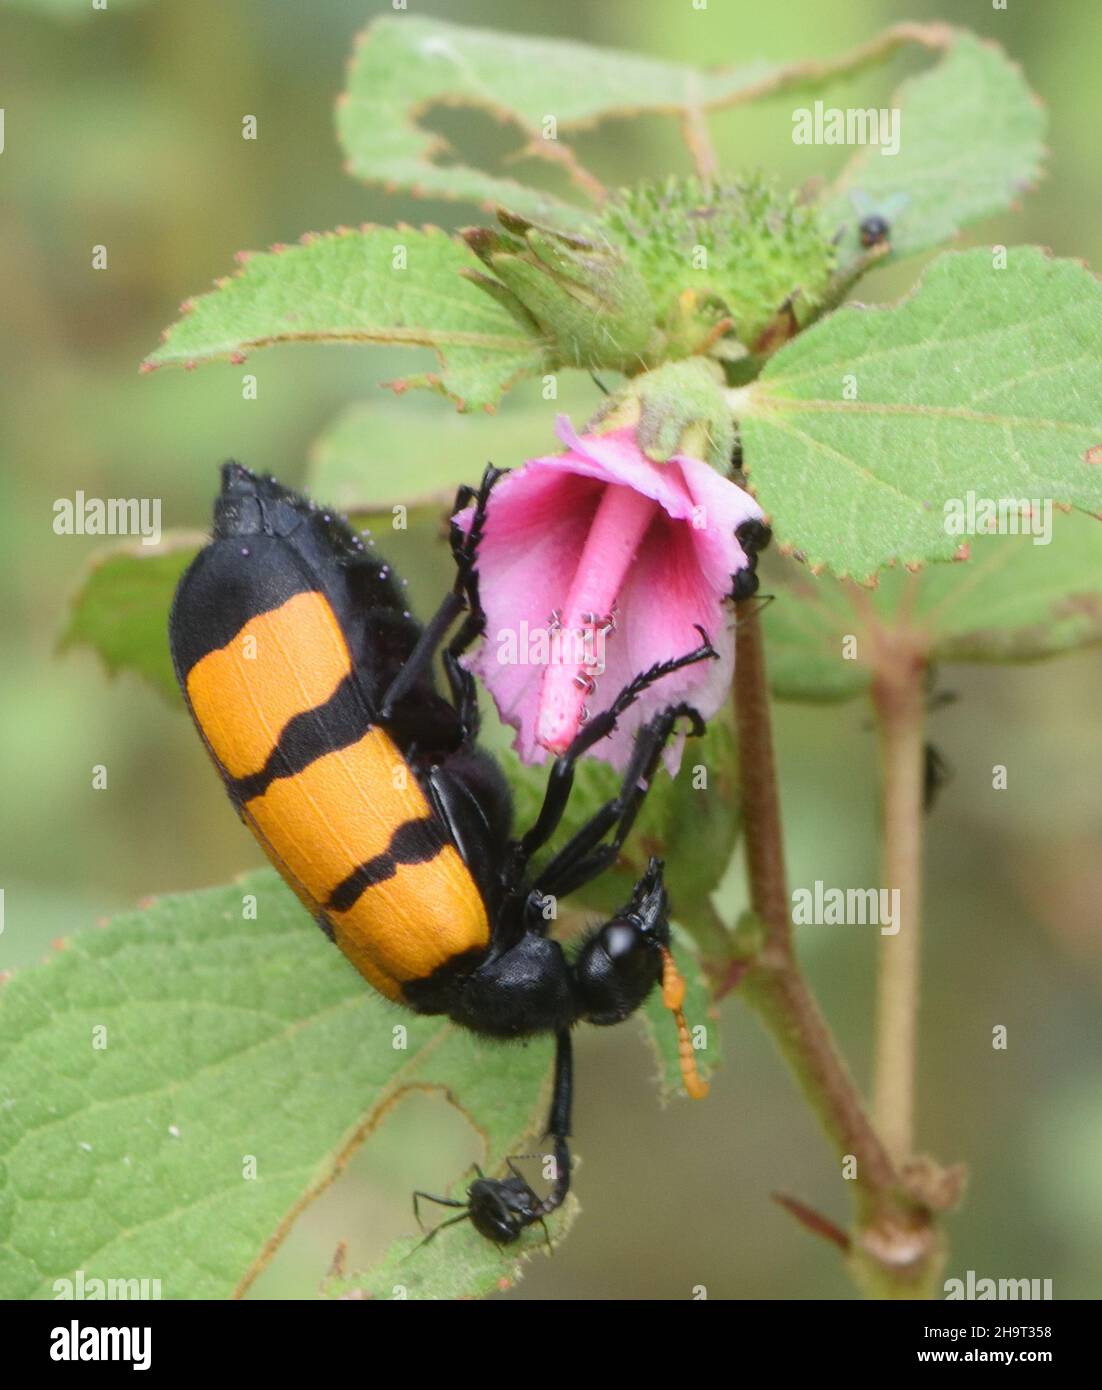 A blister beetle (Hycleus species) with dramatic warning colouration to advise prospective predators of its poisonous secretions  feeds on a flower. F Stock Photo